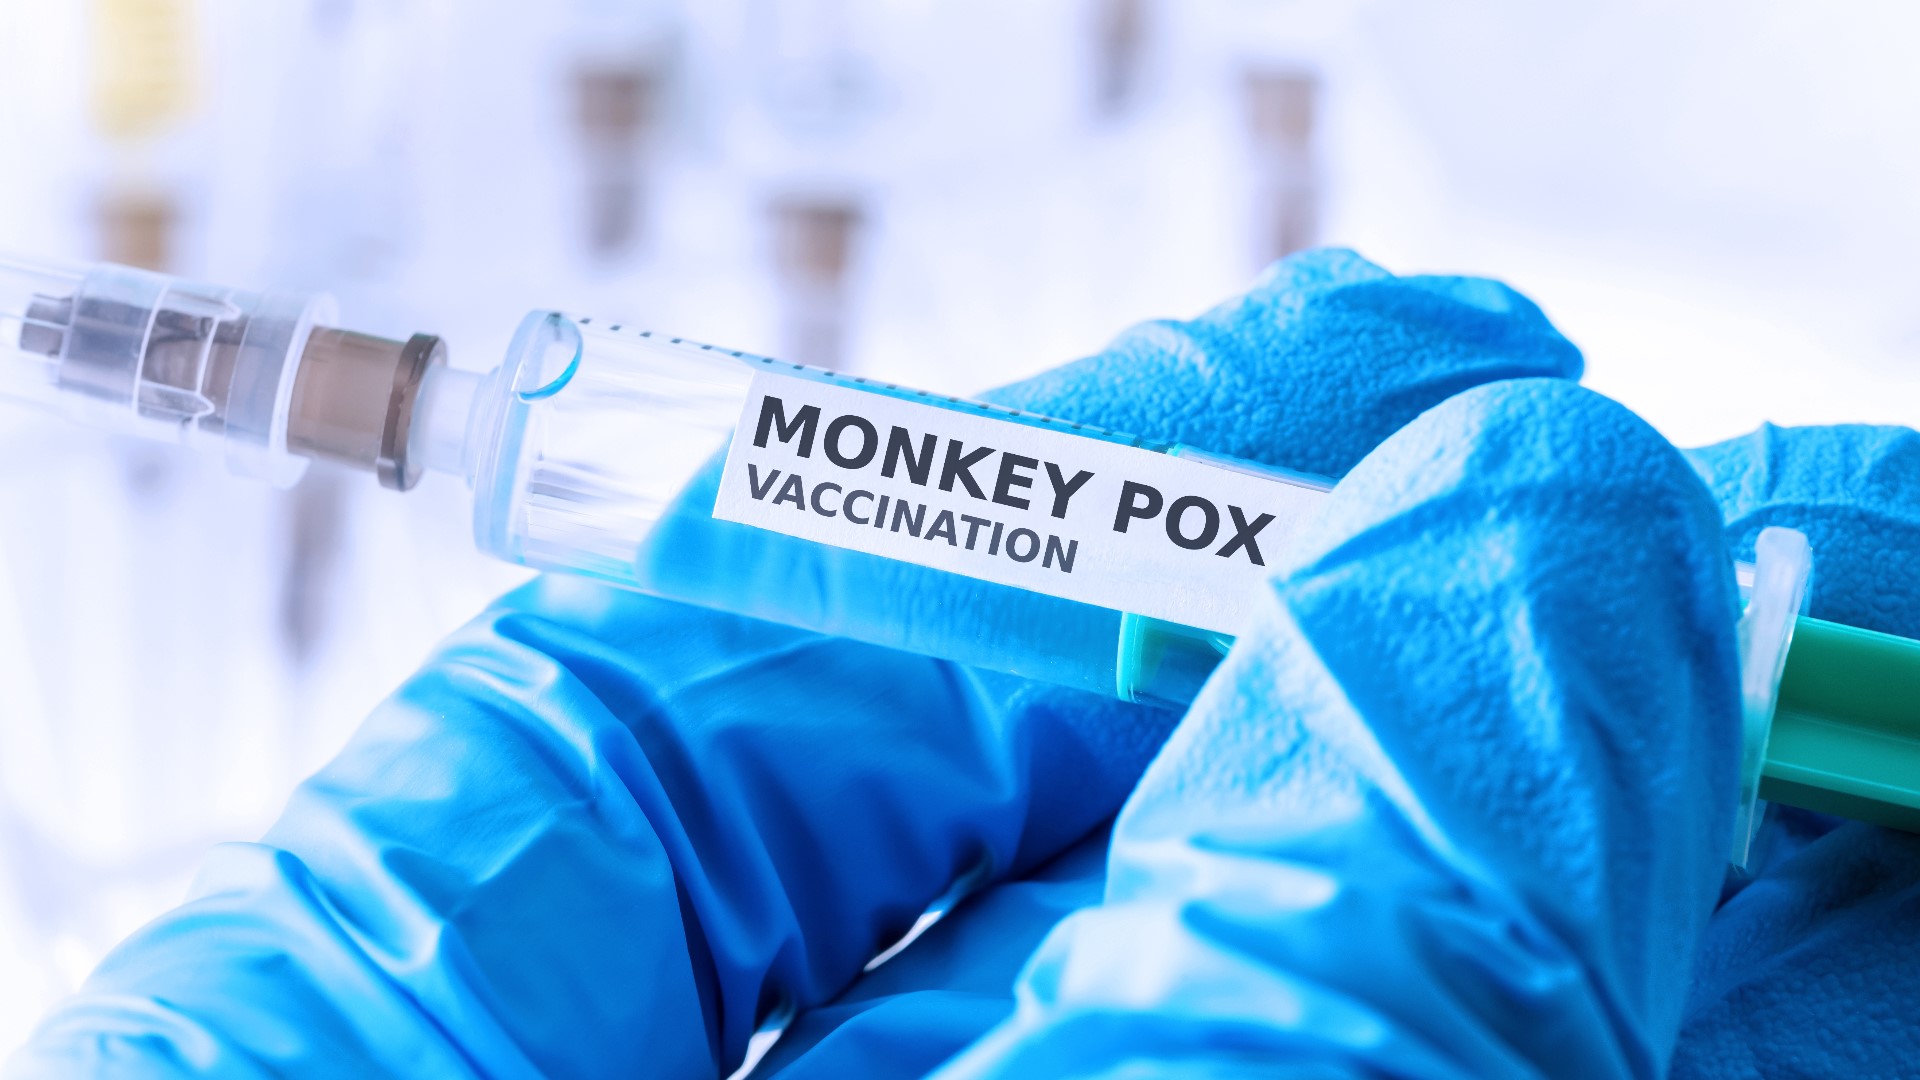 Georgia's Department of Public Health launched a new online scheduling tool for monkeypox vaccine appointments.